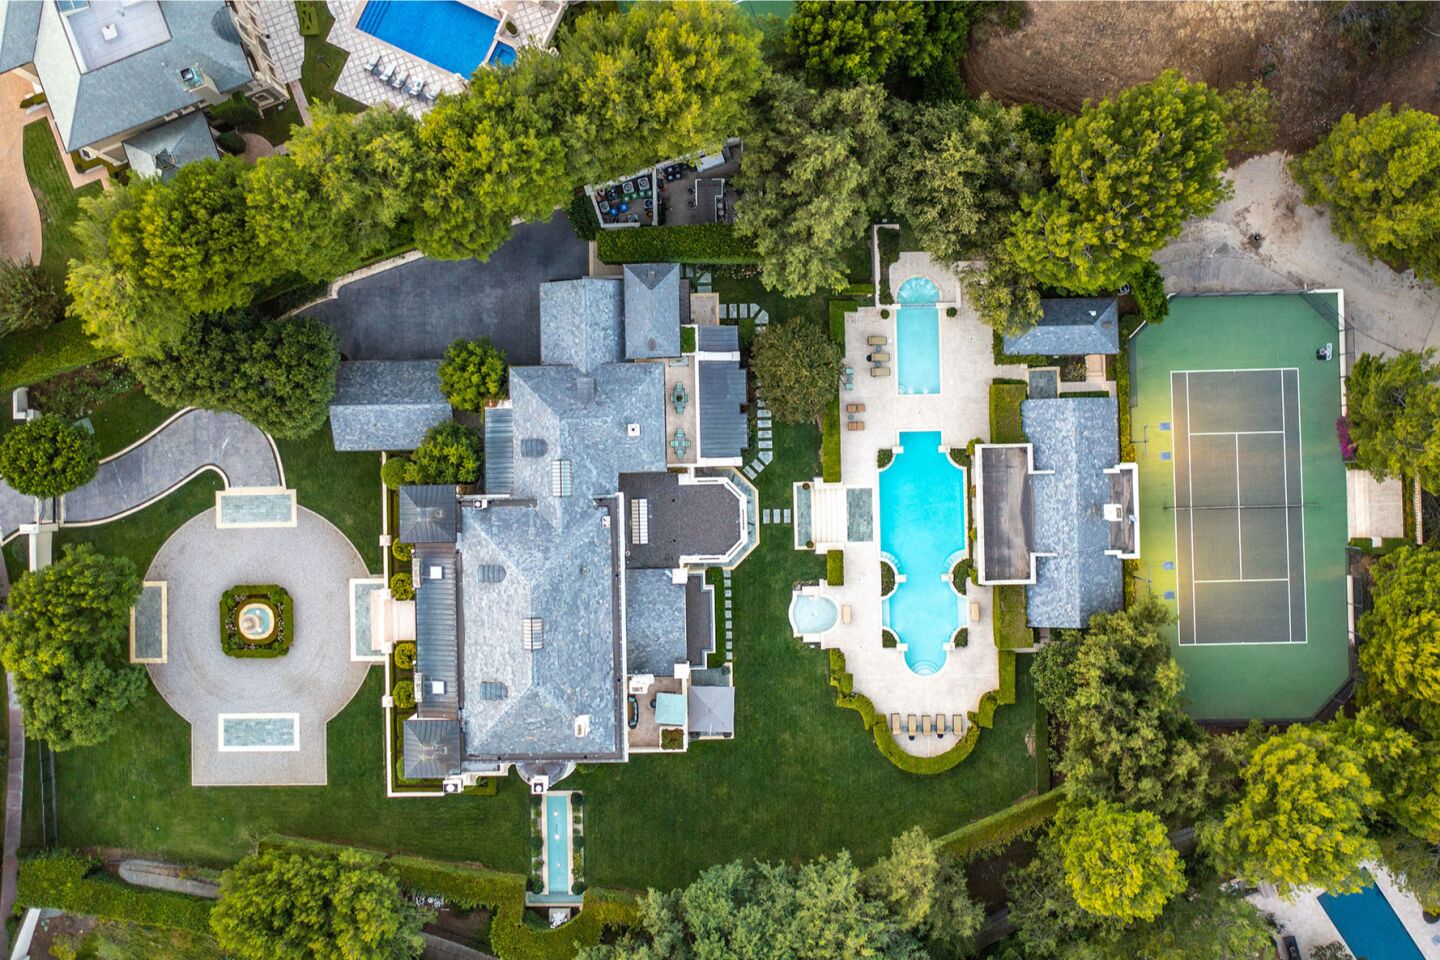 Aerial view of the estate showing the home, pool, tennis court and driveway.